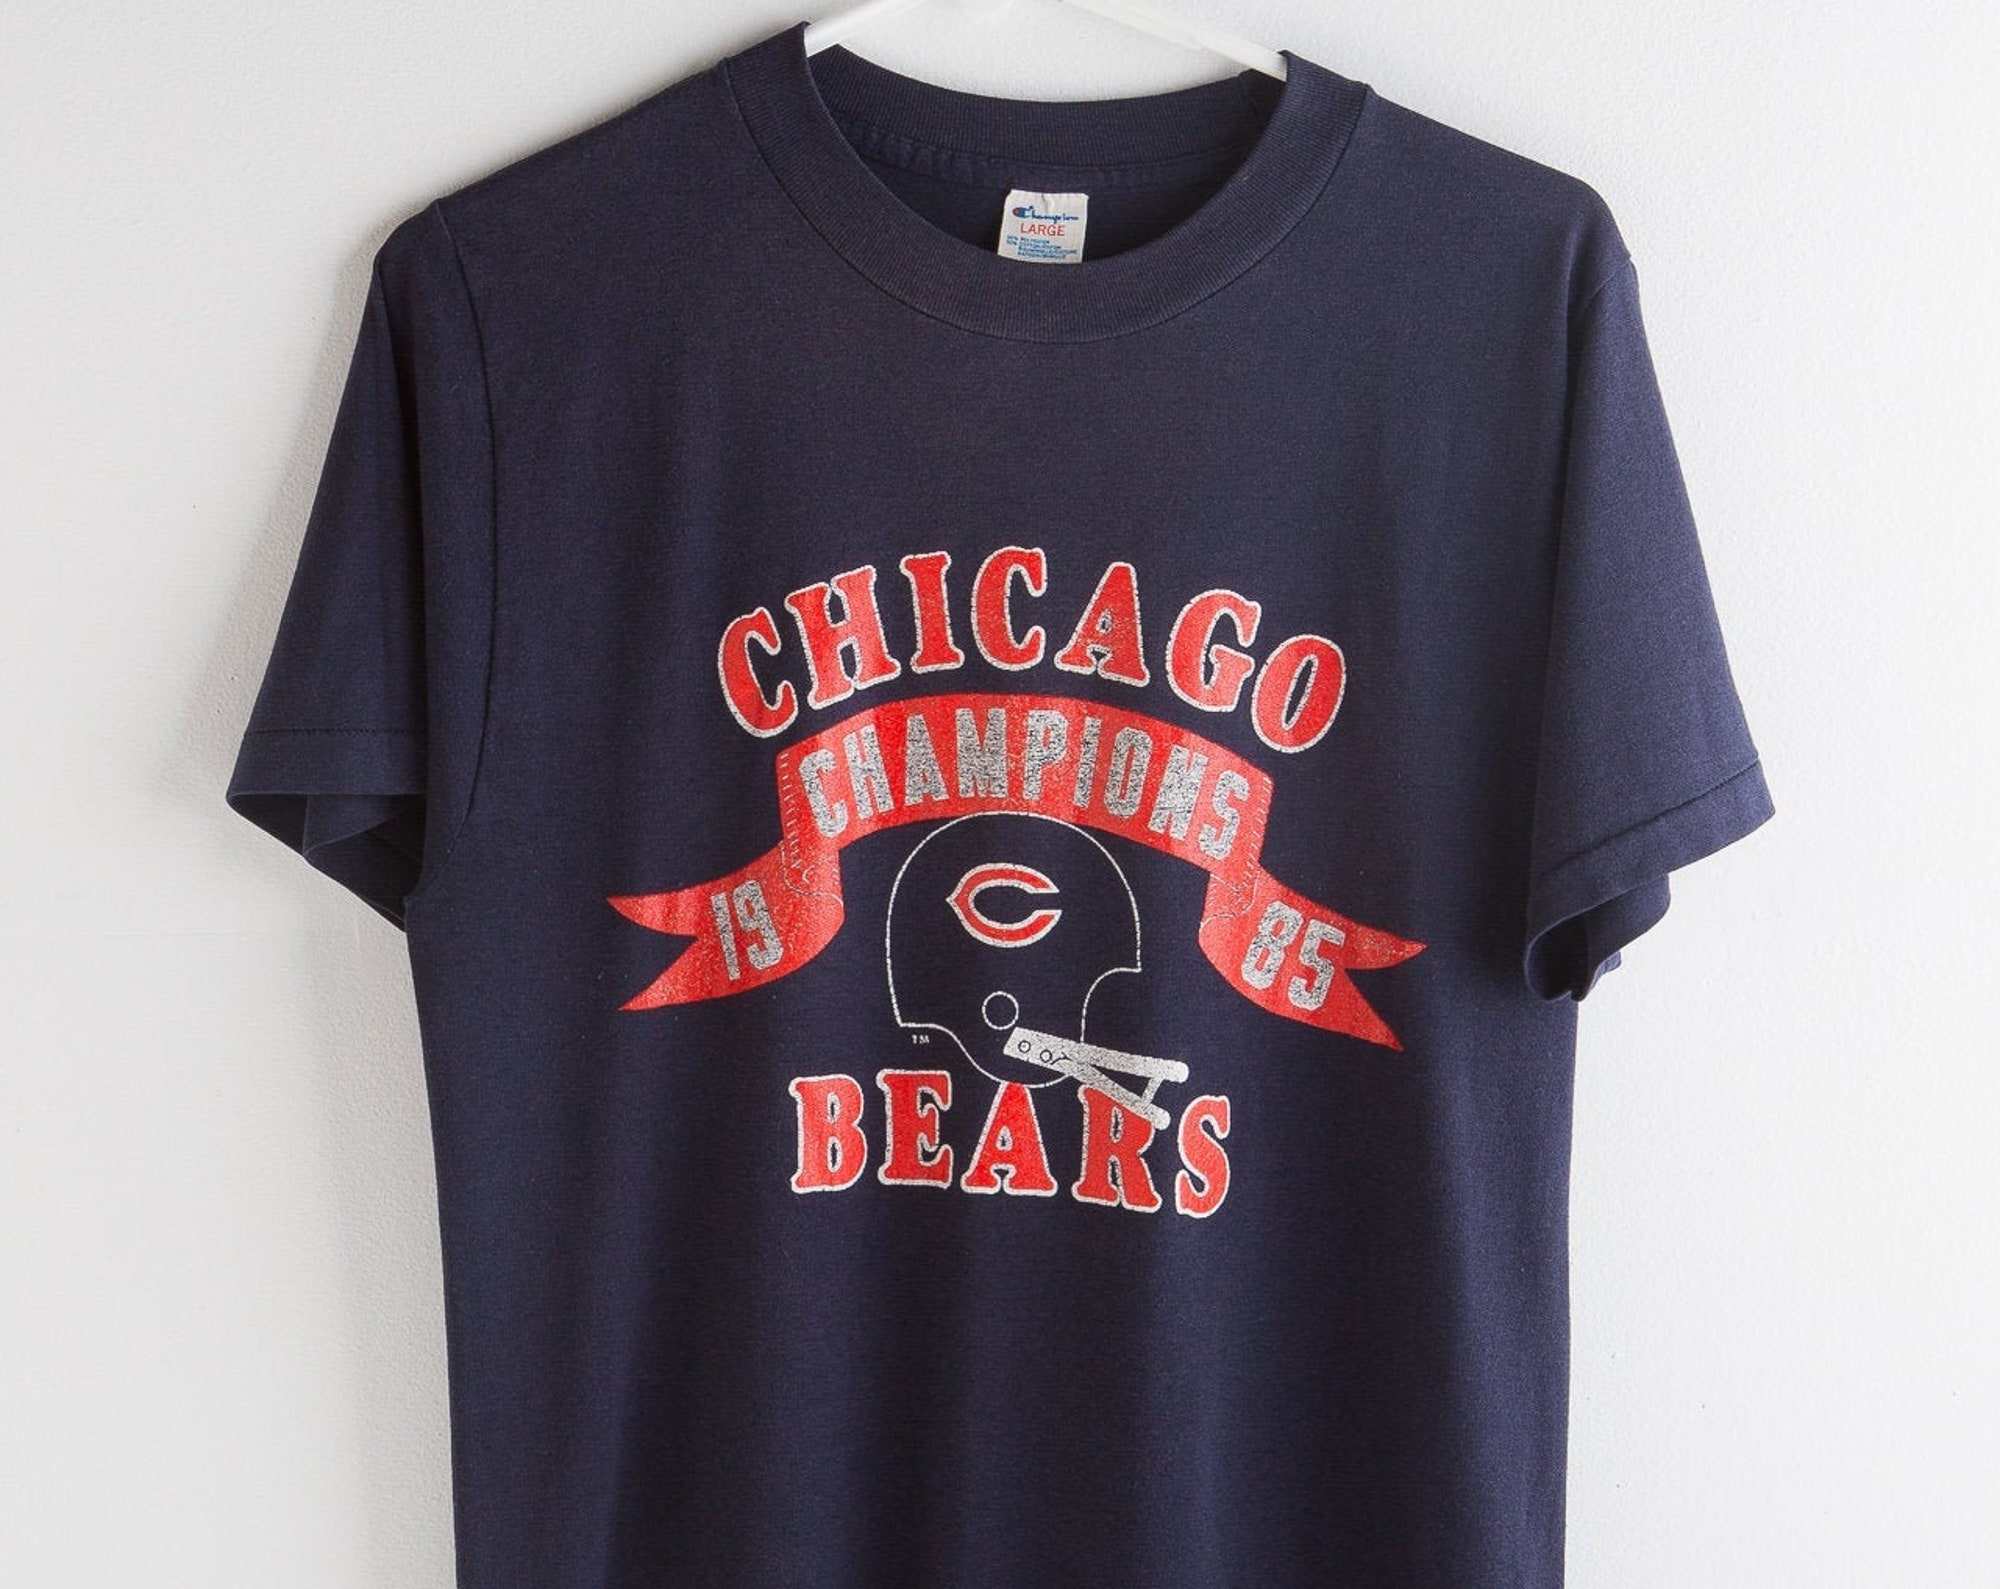 Discover Vintage Chicago Bears tshirt 80s